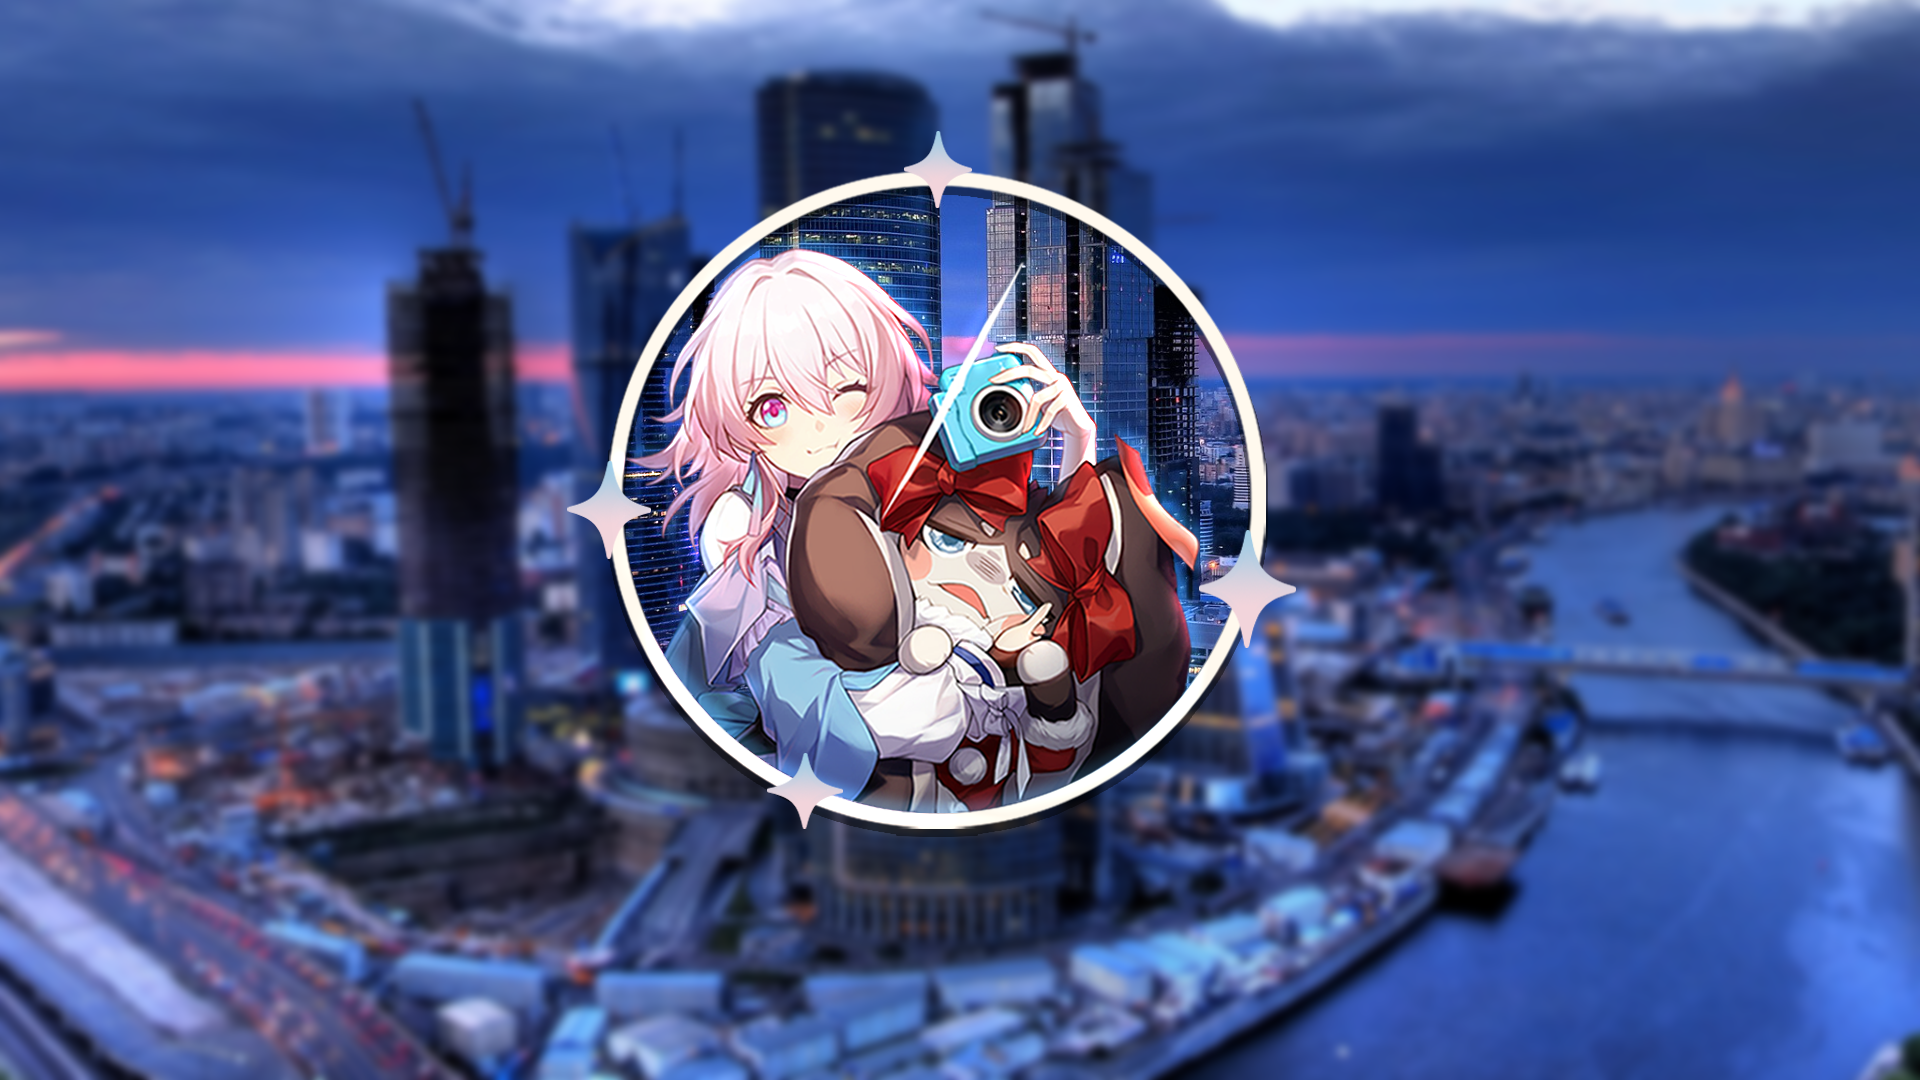 HoYoverse Honkai Star Rail Picture In Picture Anime Girls Urban Cityscape River March 7th Honkai Sta 1920x1080